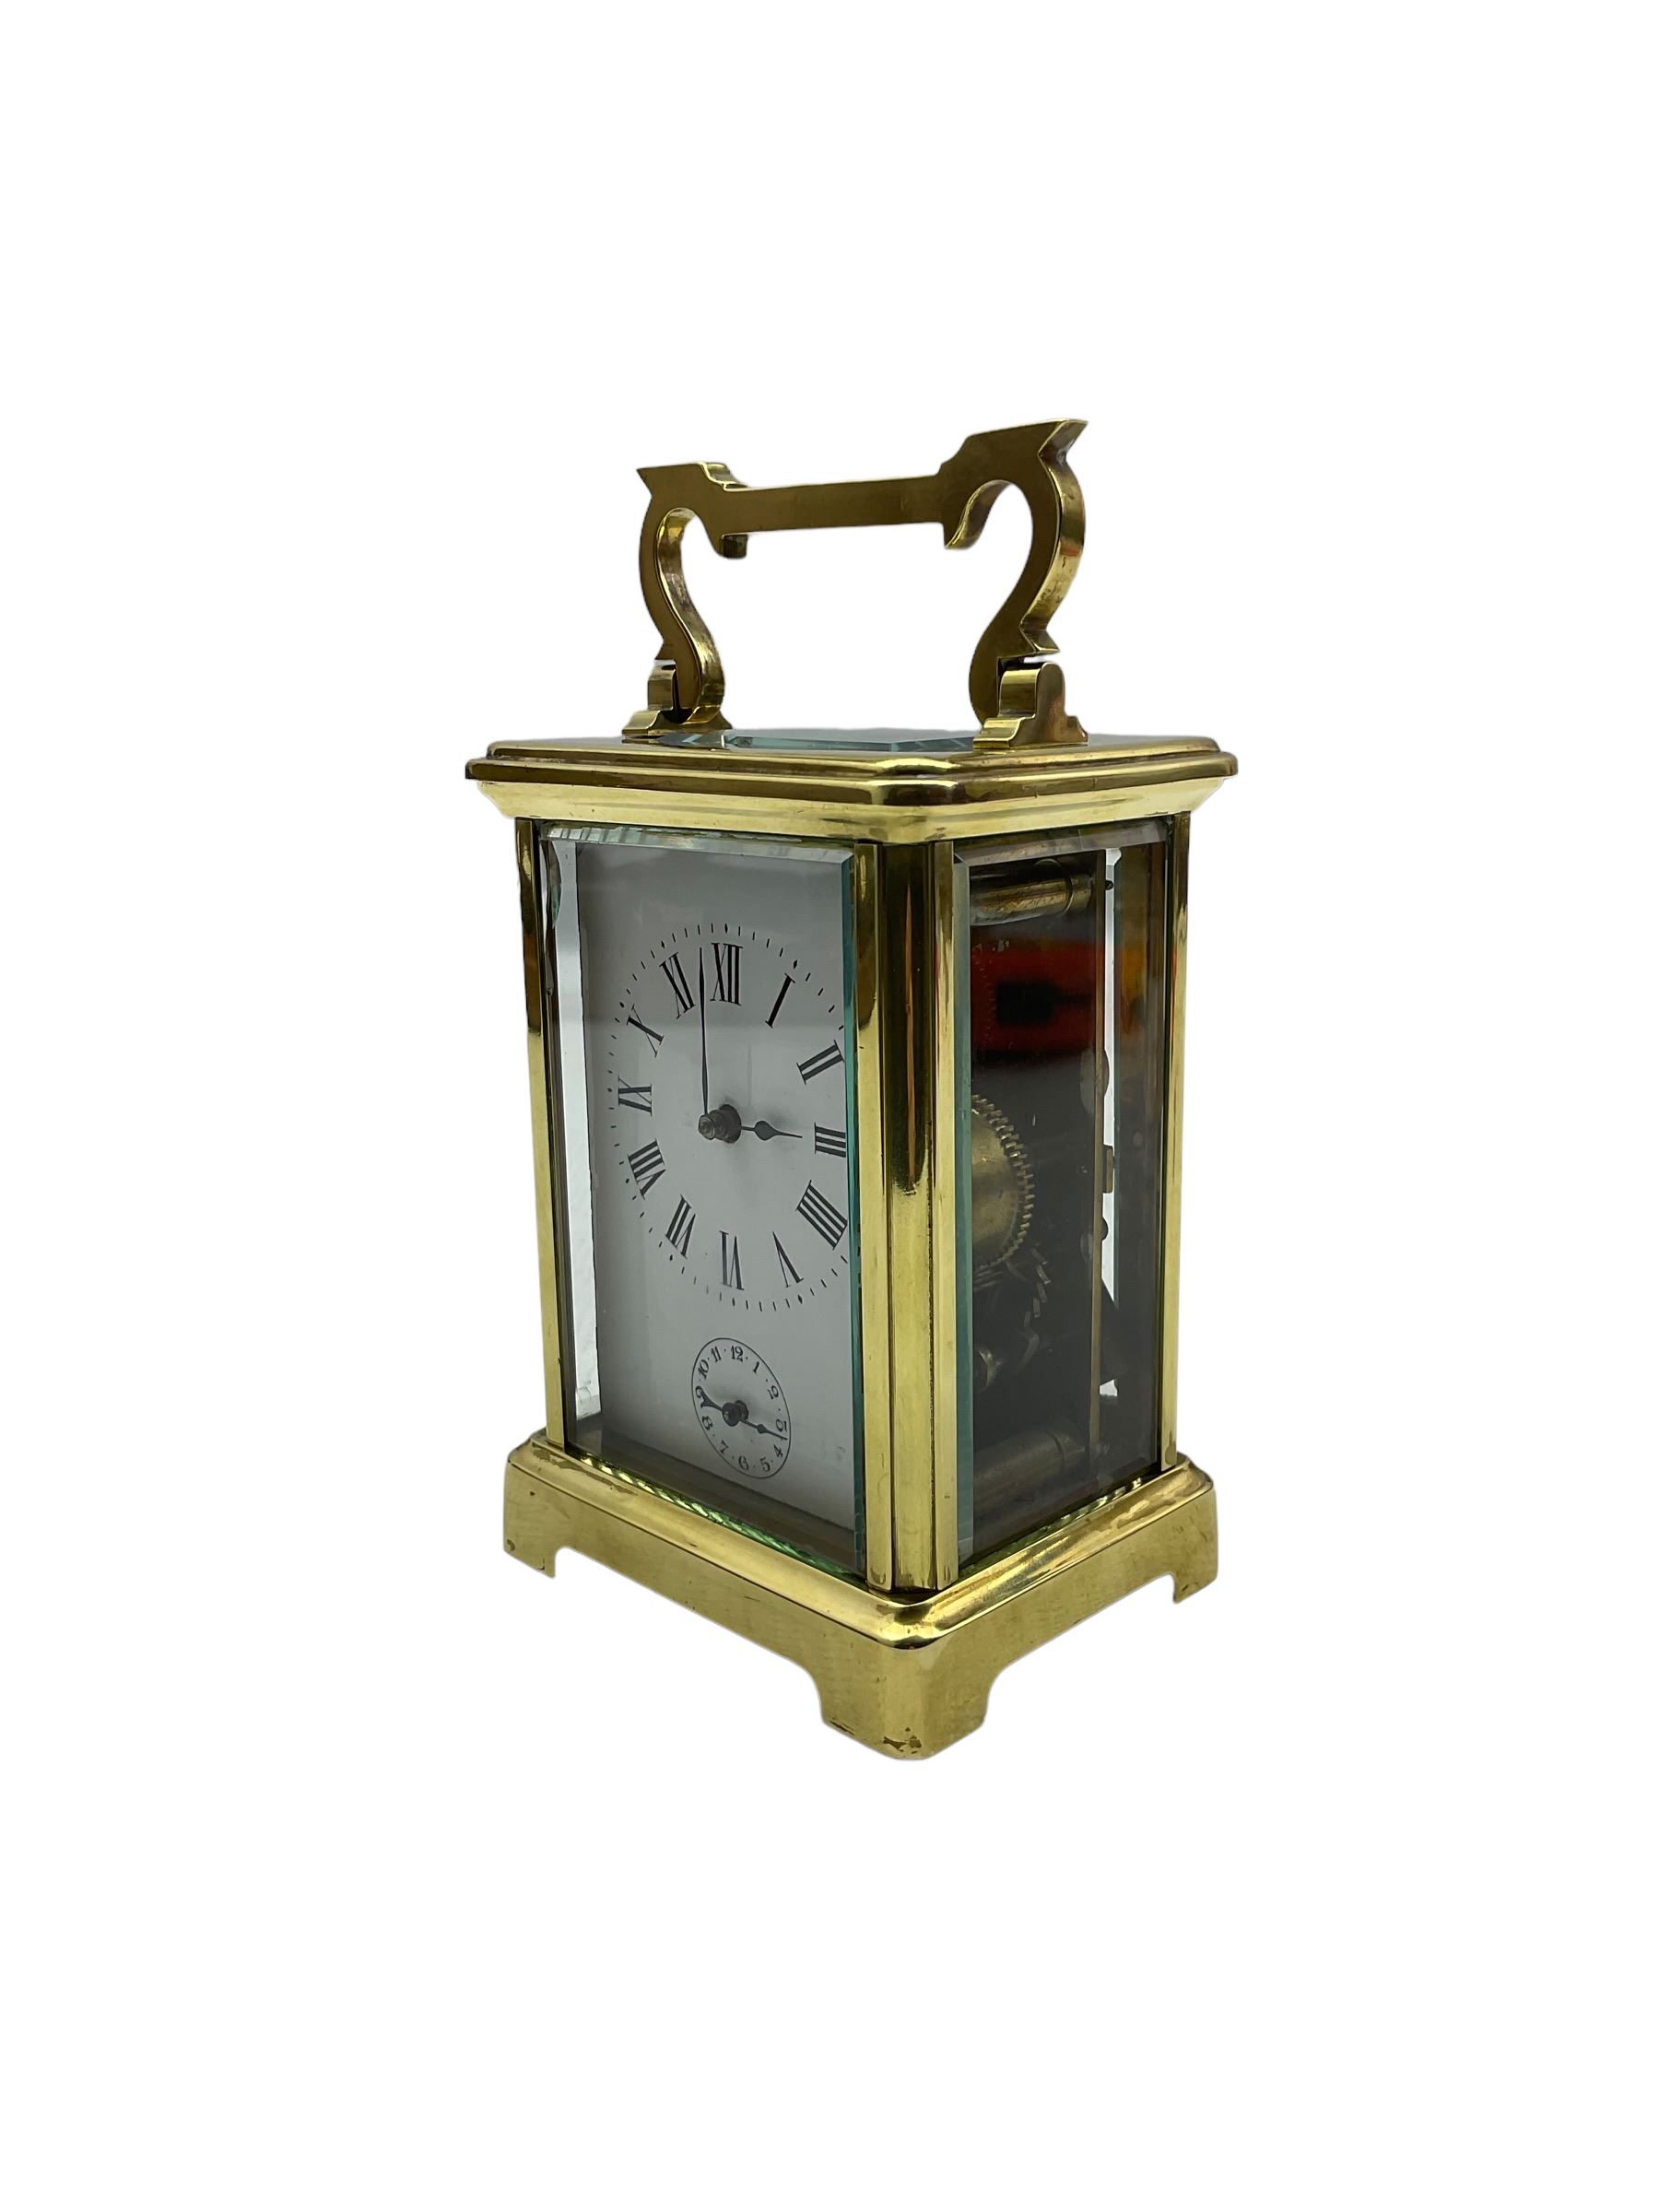 French - 19th century 8-day brass cased carriage clock - Image 2 of 4